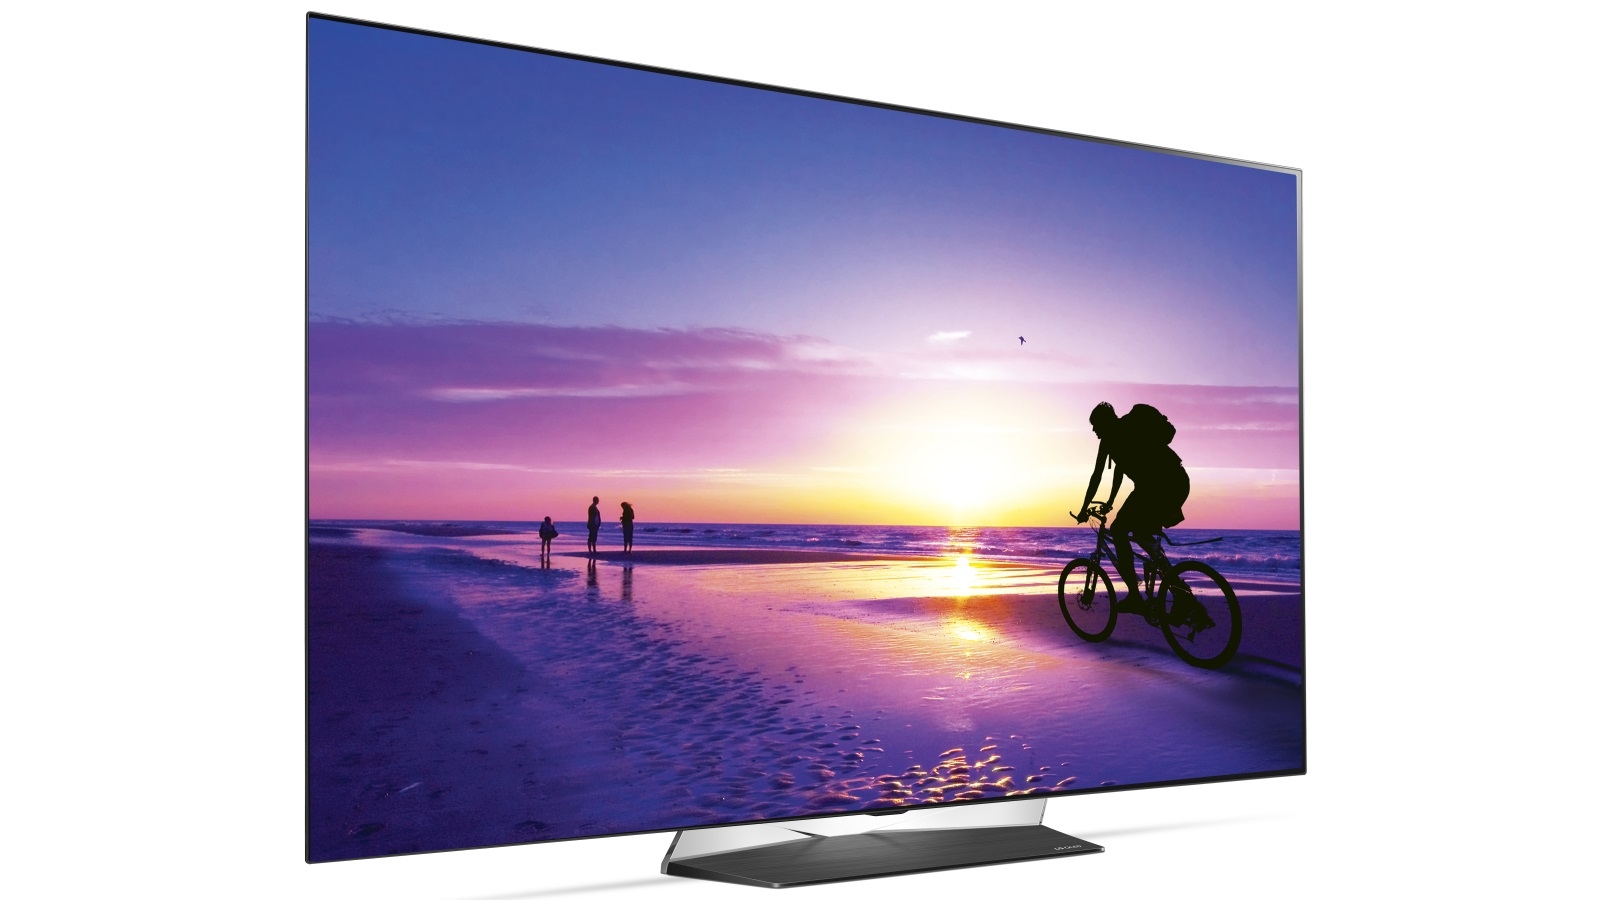 THE BEST BLACK FRIDAY TV OFFERS: WHAT CAN WE EXPECT IN 2019? - The Hear UP